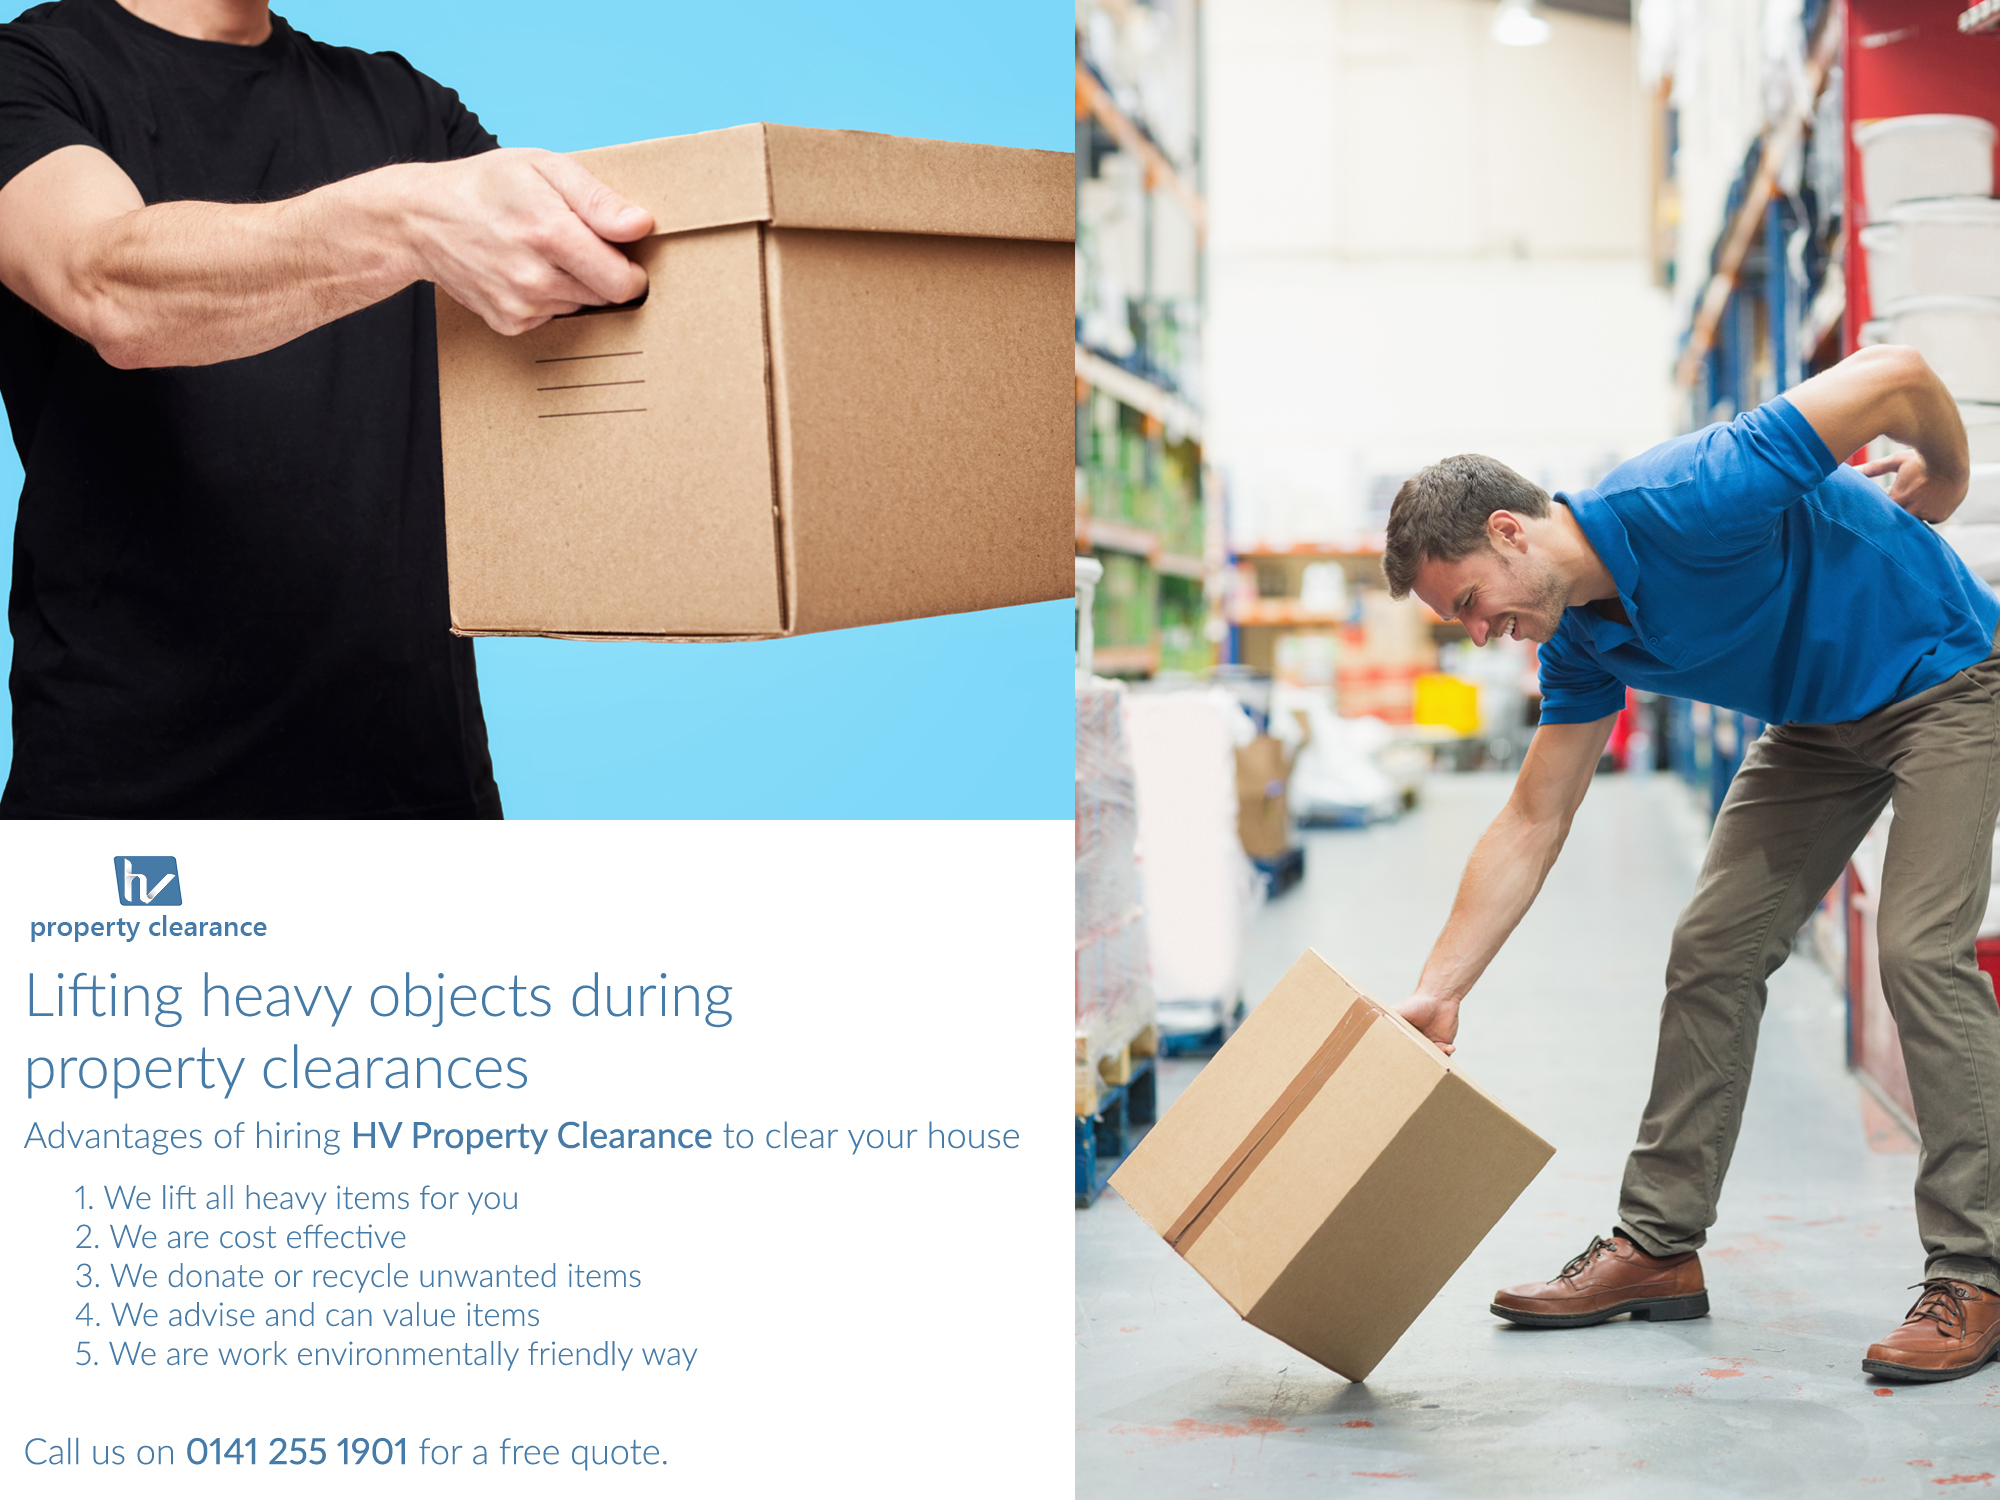 Lifting heavy objects during property clearances